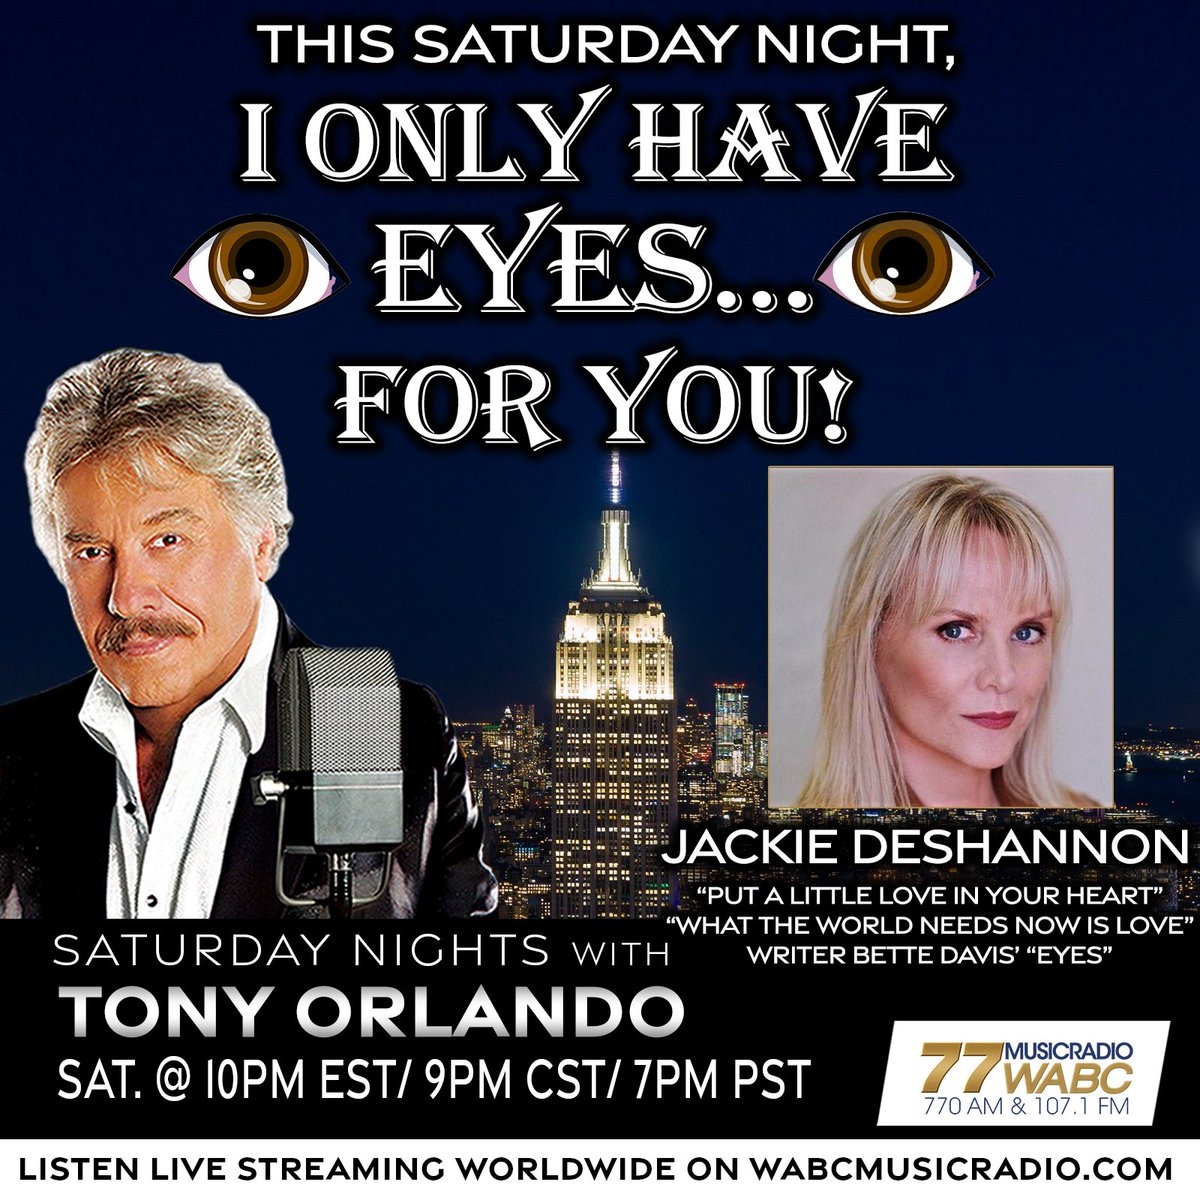 TOMORROW at 10PM: I only have EYES... for YOU! Host @TonyOrlando will have Singer/Songwriter Jackie DeShannon on the show! Join us TOMORROW from 10PM-midnight on wabcmusicradio.com, 770 AM, or on the 77 WABC app! #77WABCRadio #Music #TonyOrlando